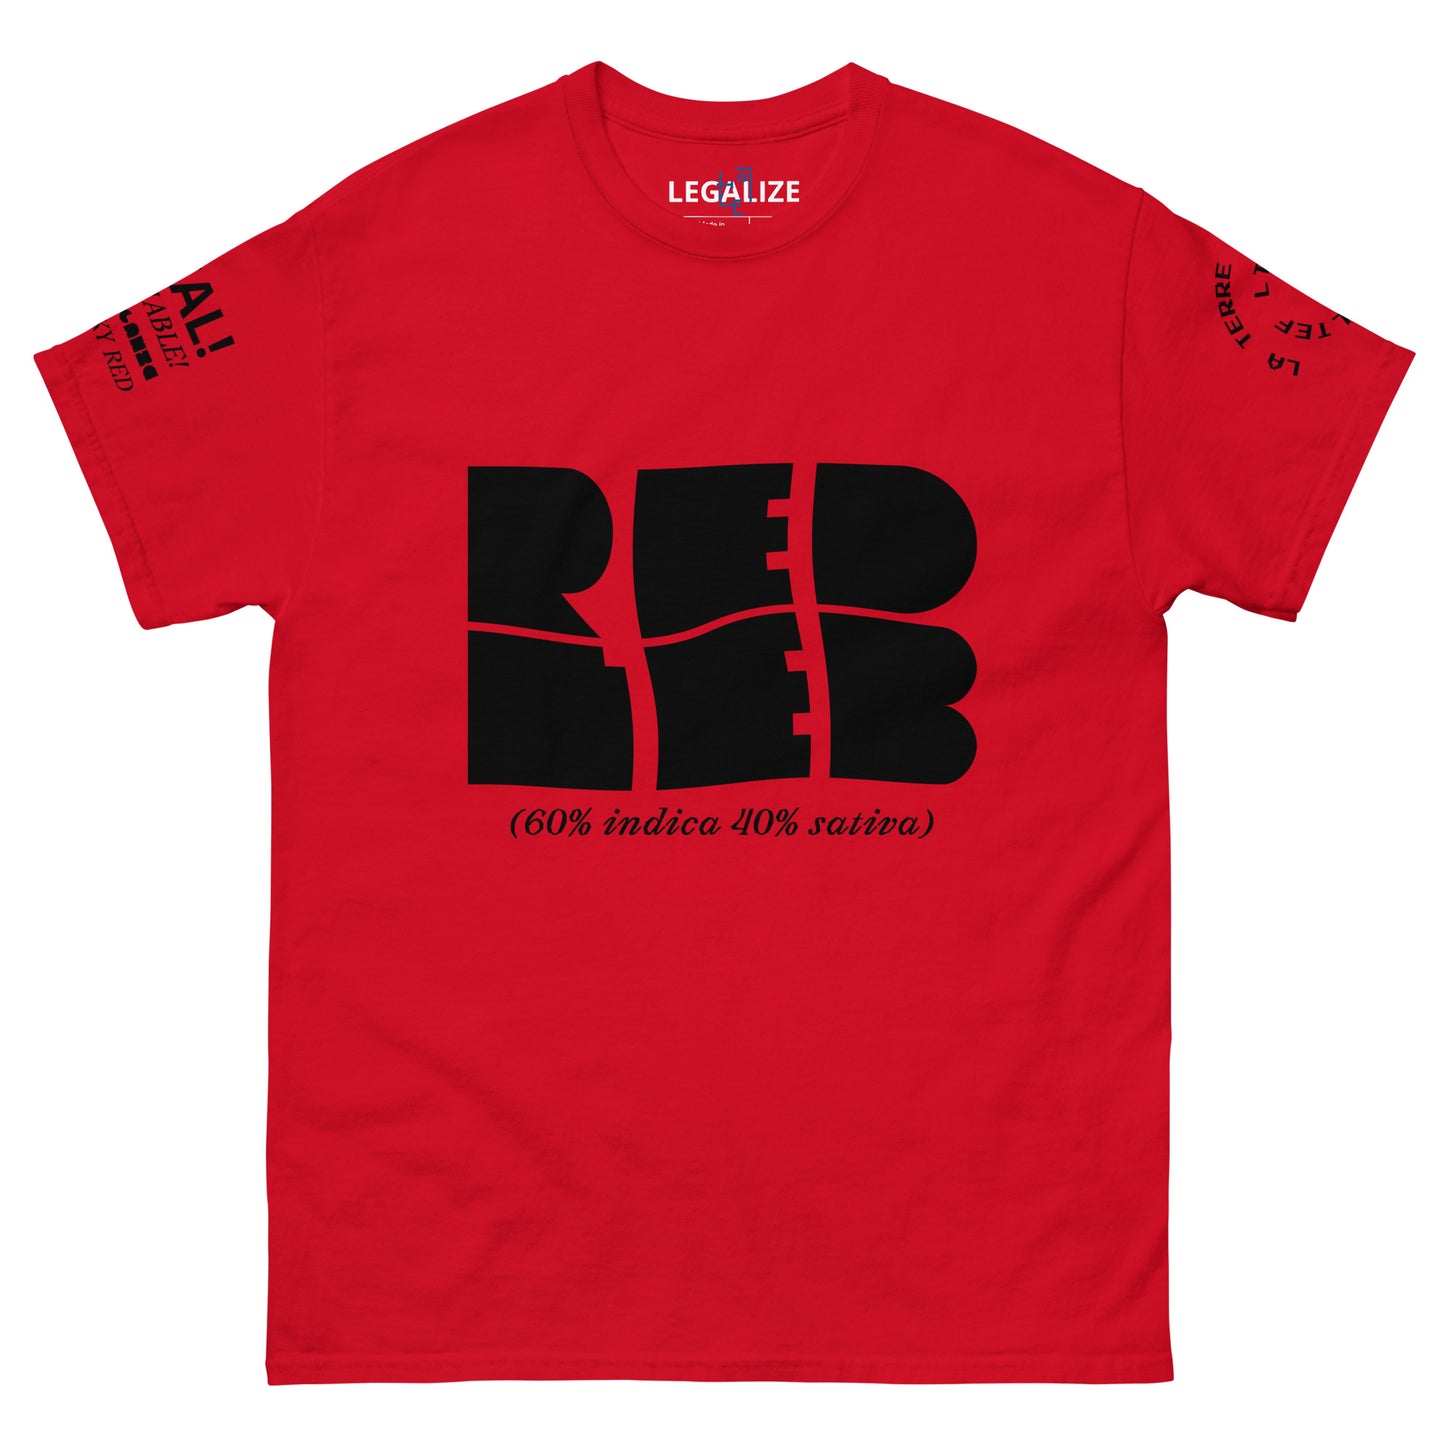 RED LEB T